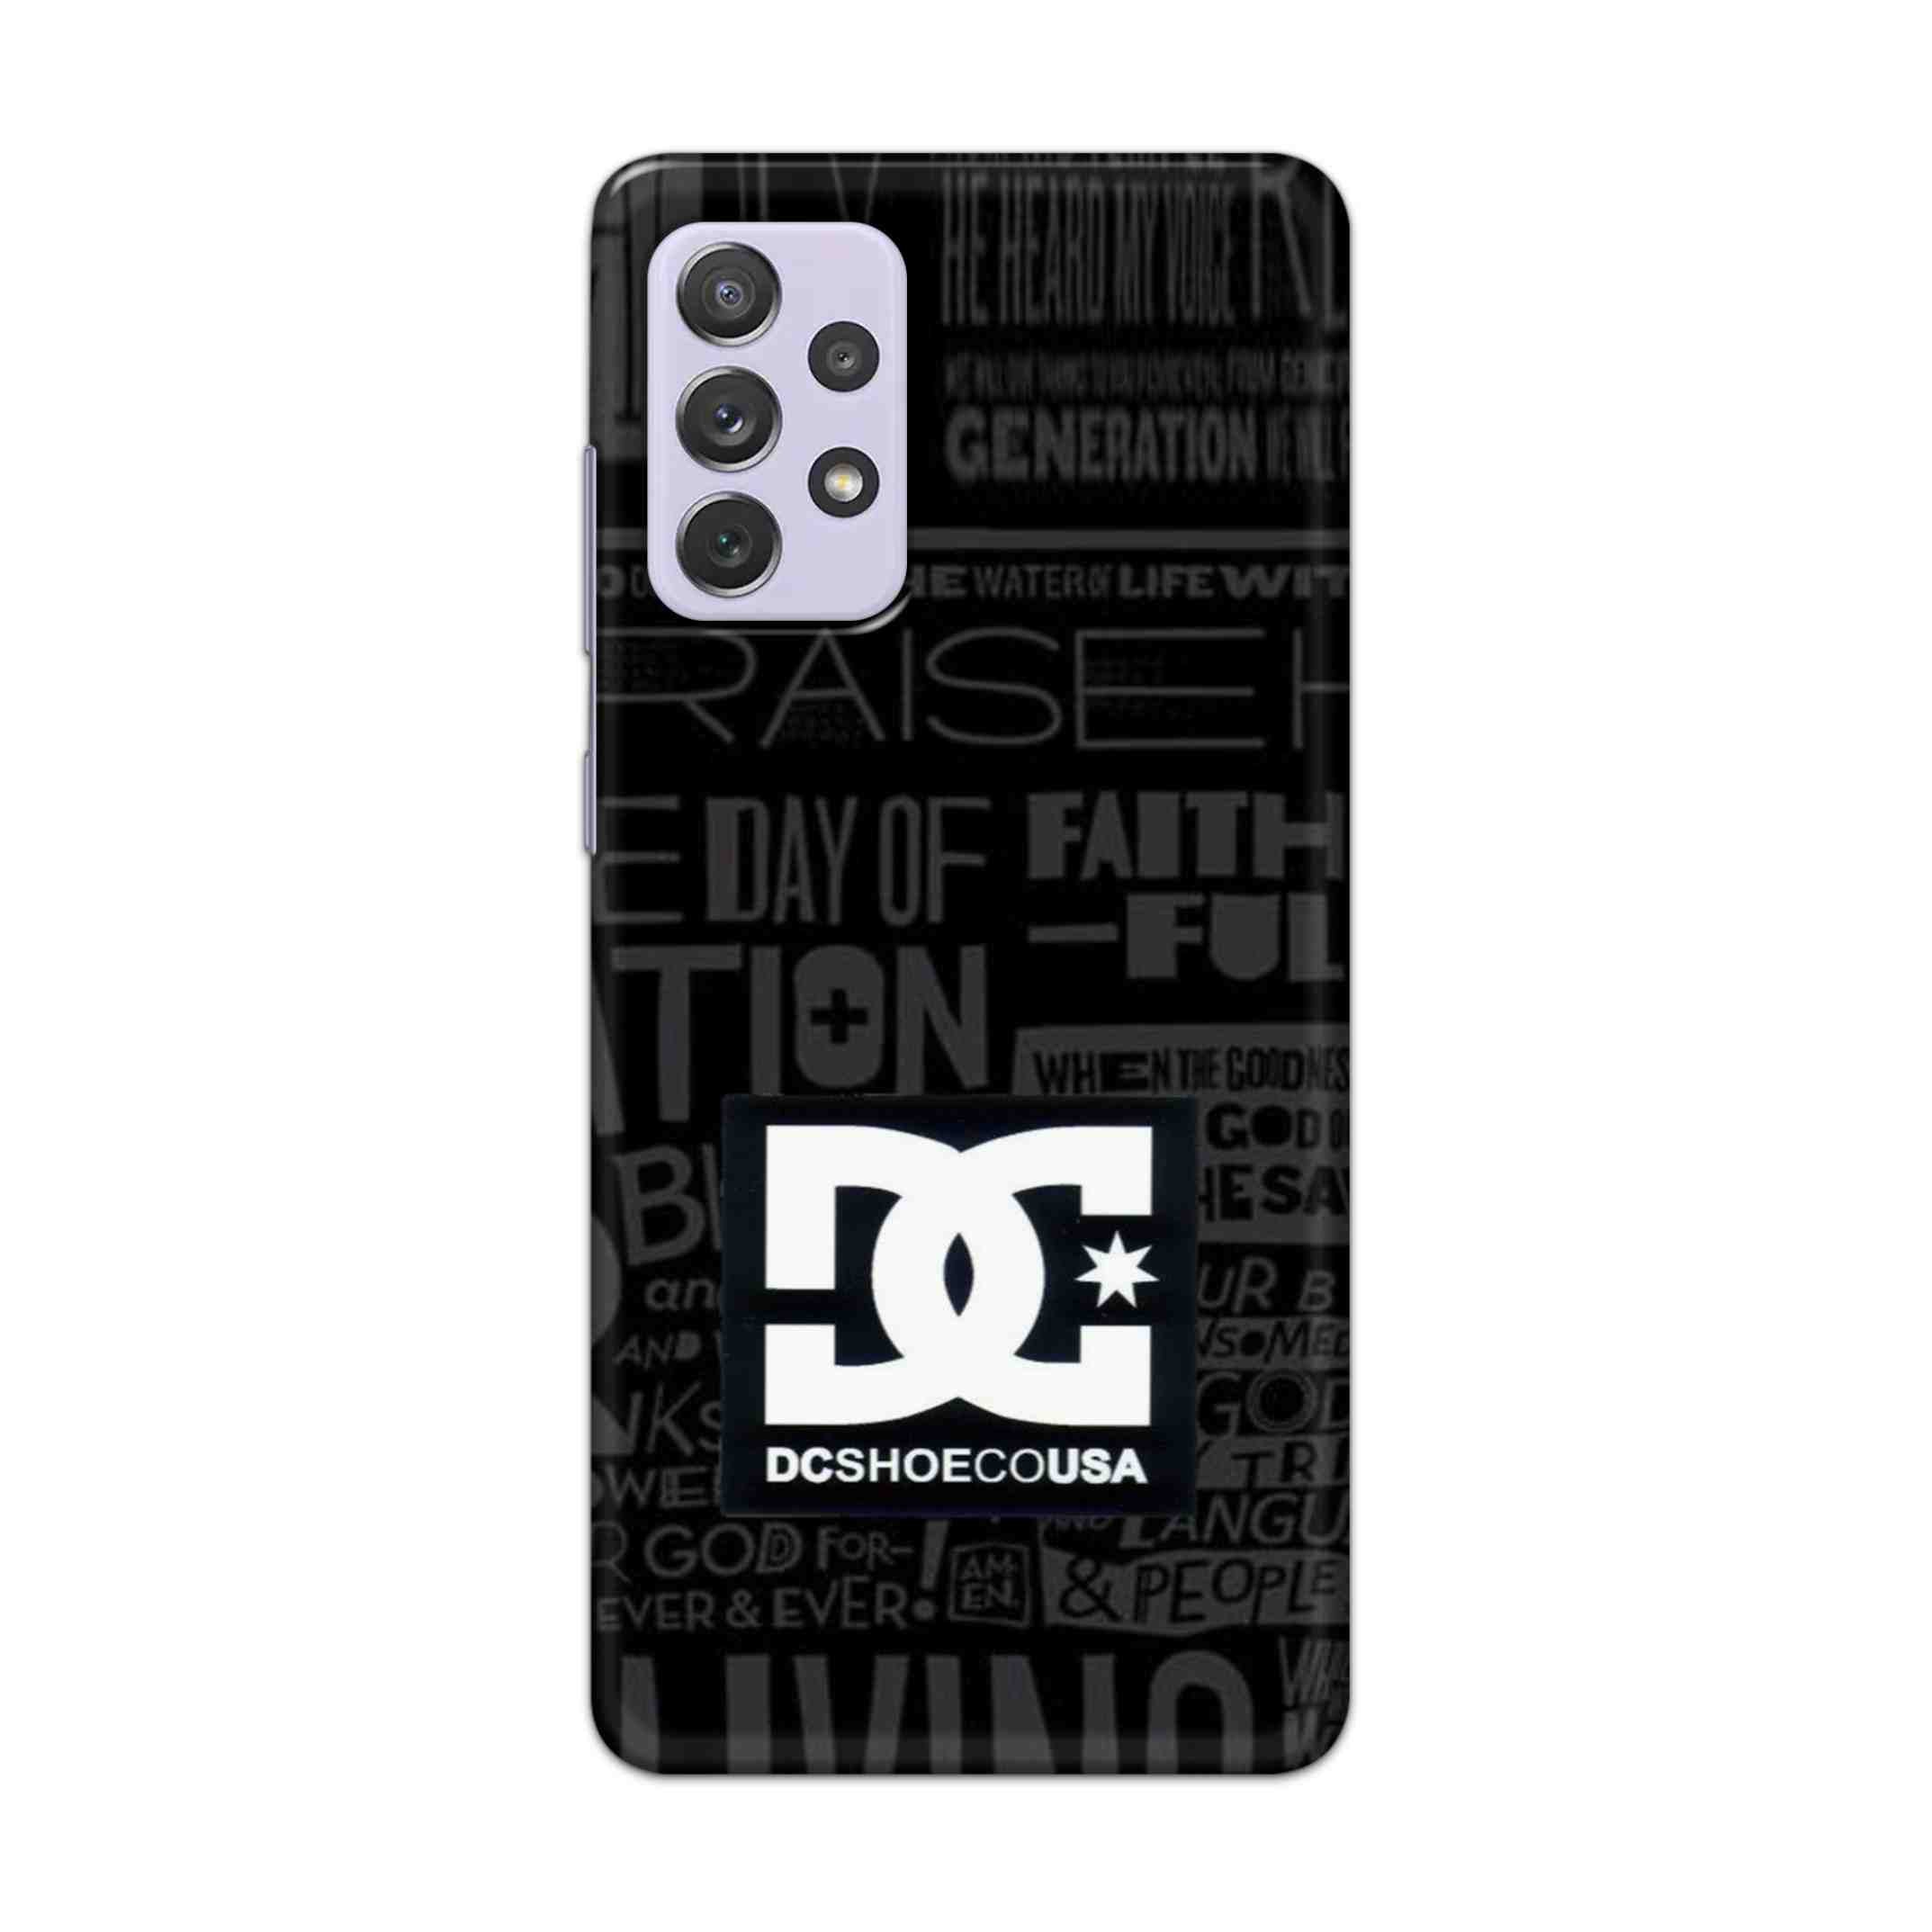 Buy Dc Shoecousa Hard Back Mobile Phone Case Cover For Samsung Galaxy A72 Online